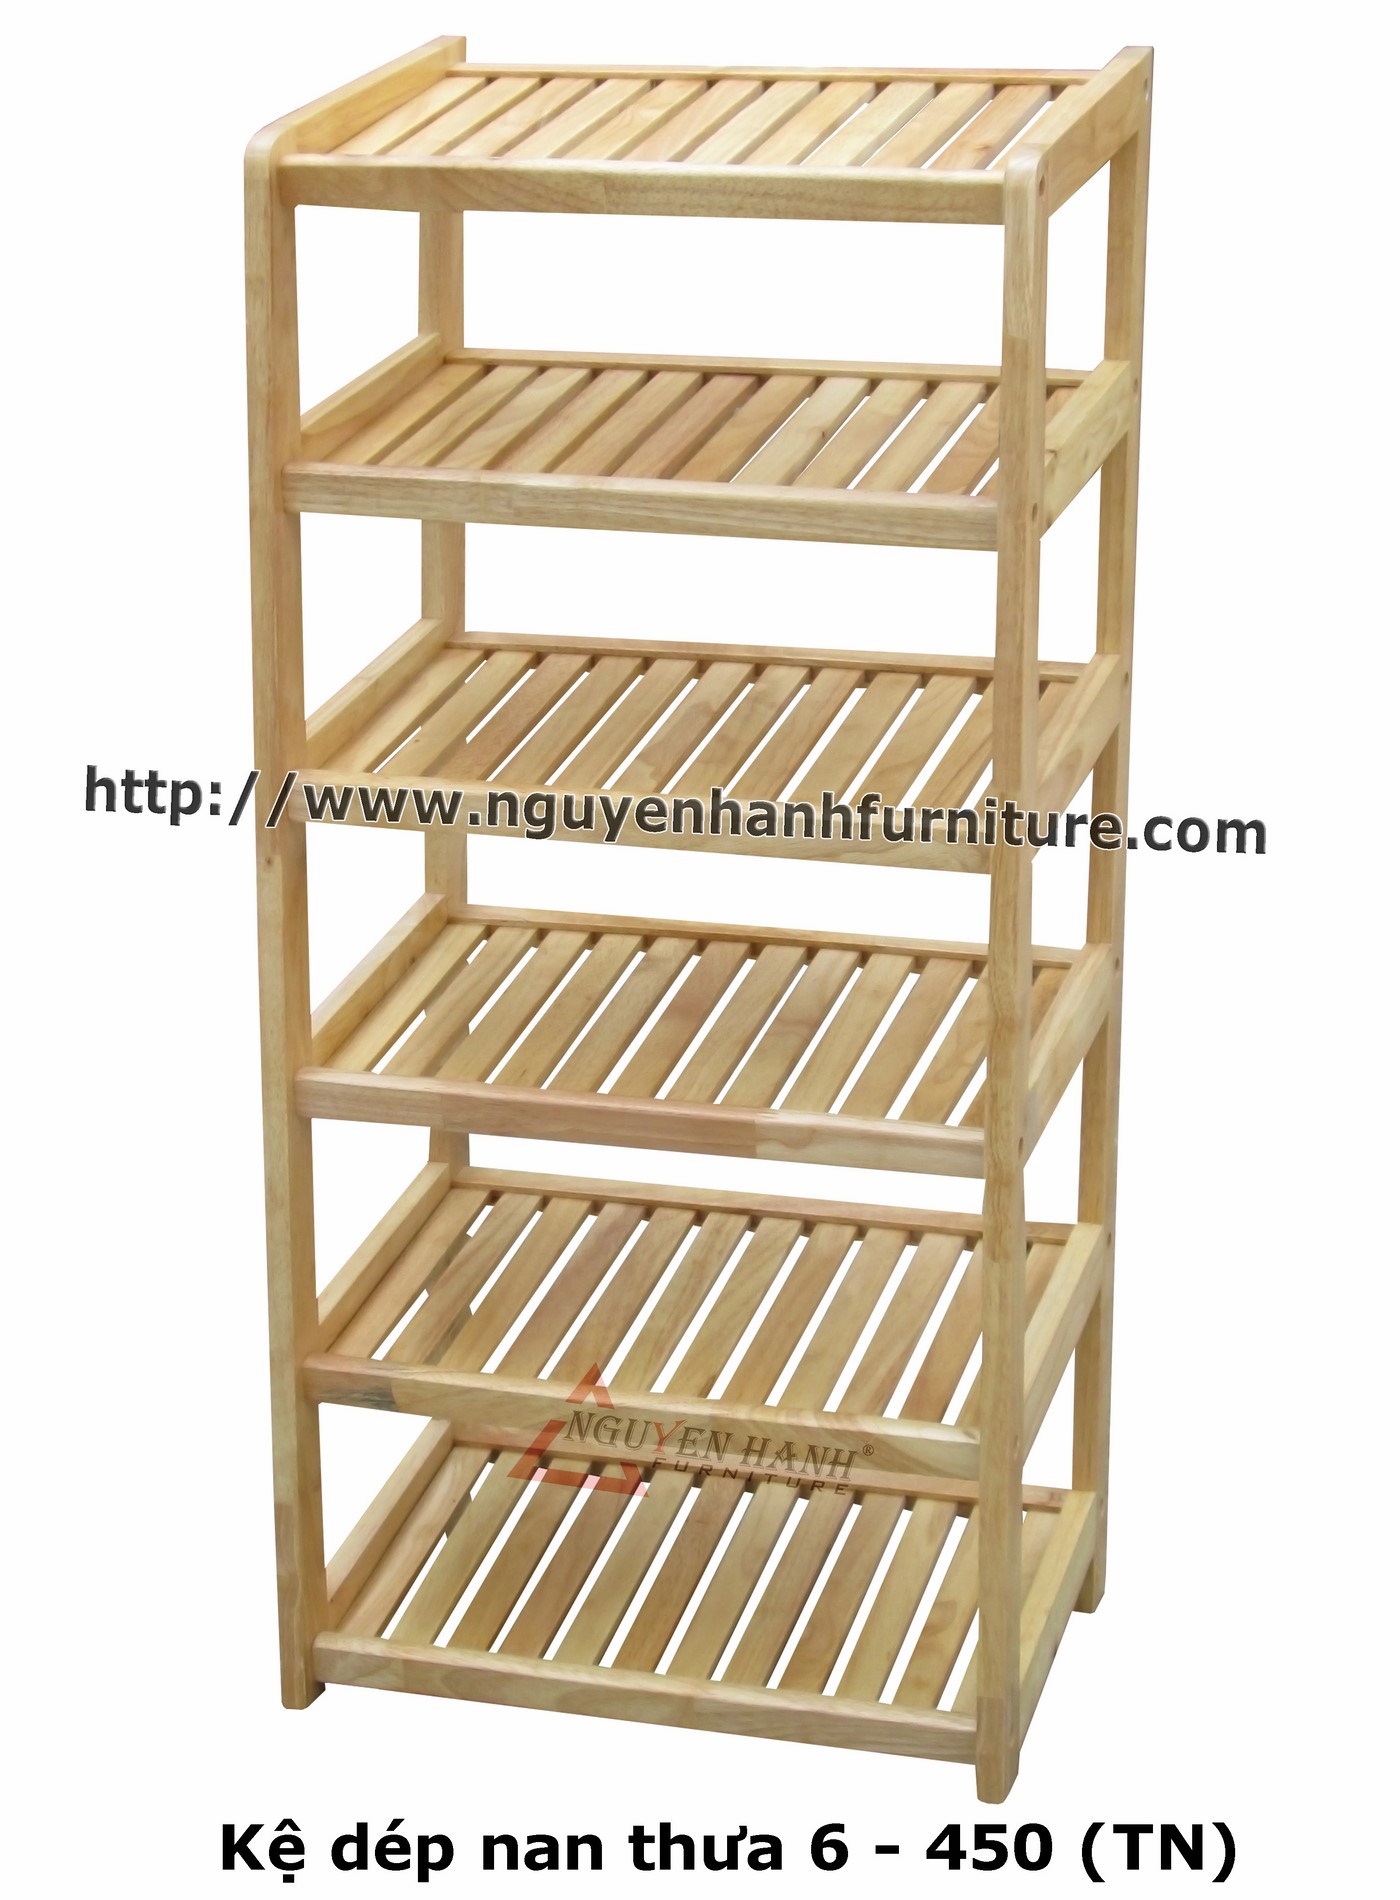 Name product: Shoeshelf 6 Floors 450 with sparse blades (Natural) - Dimensions: 45 x 30 x 98 (H) - Description: Wood natural rubber